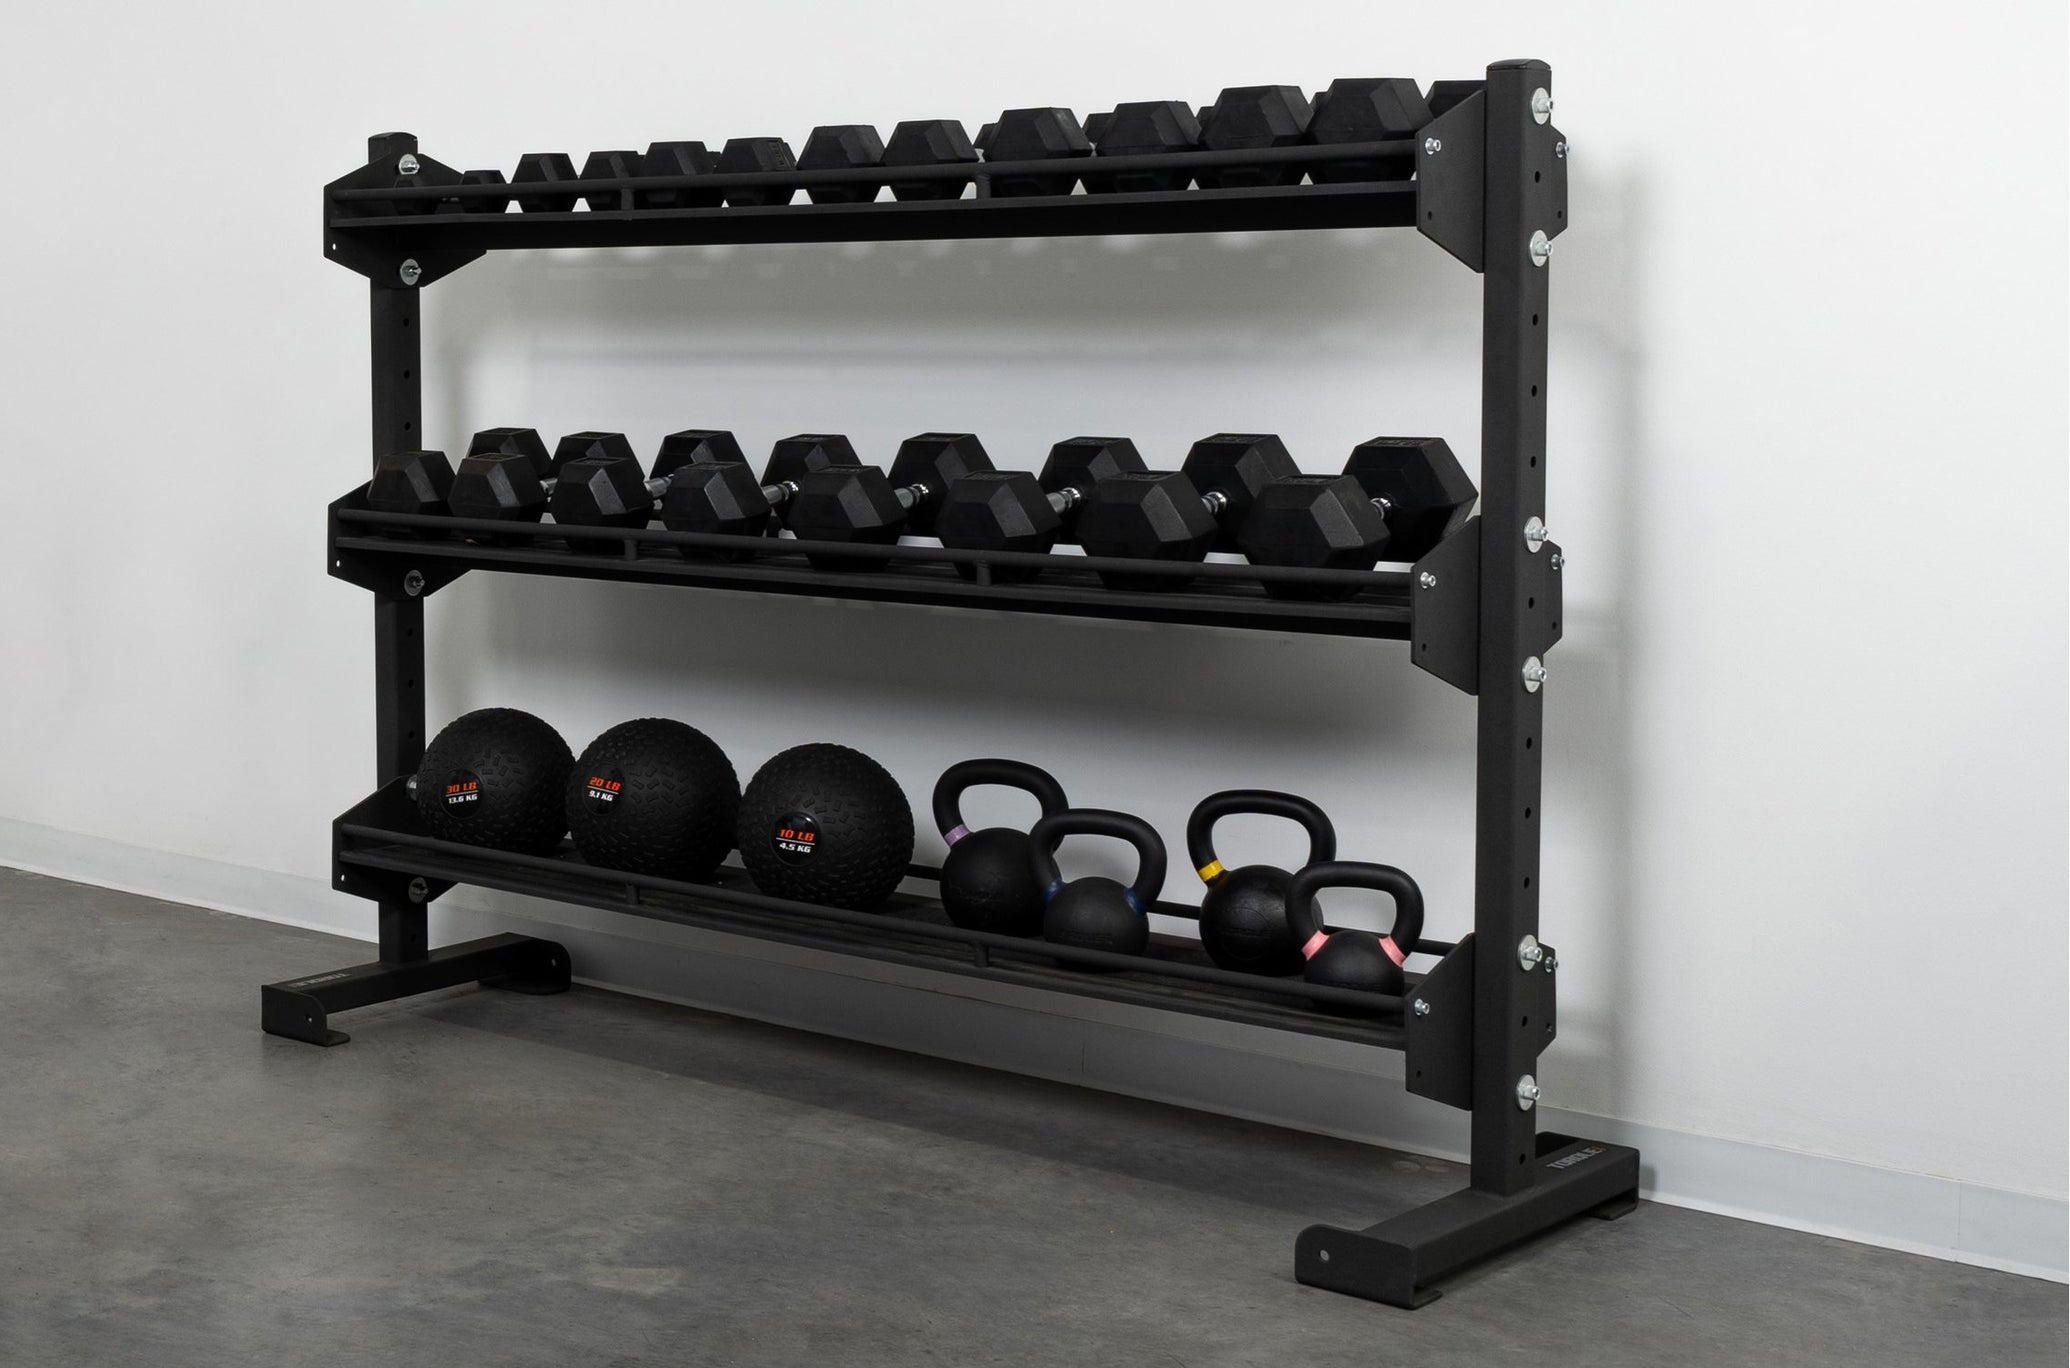 6 Foot Universal Storage Rack (Full Commercial HD) - Torque Fitness